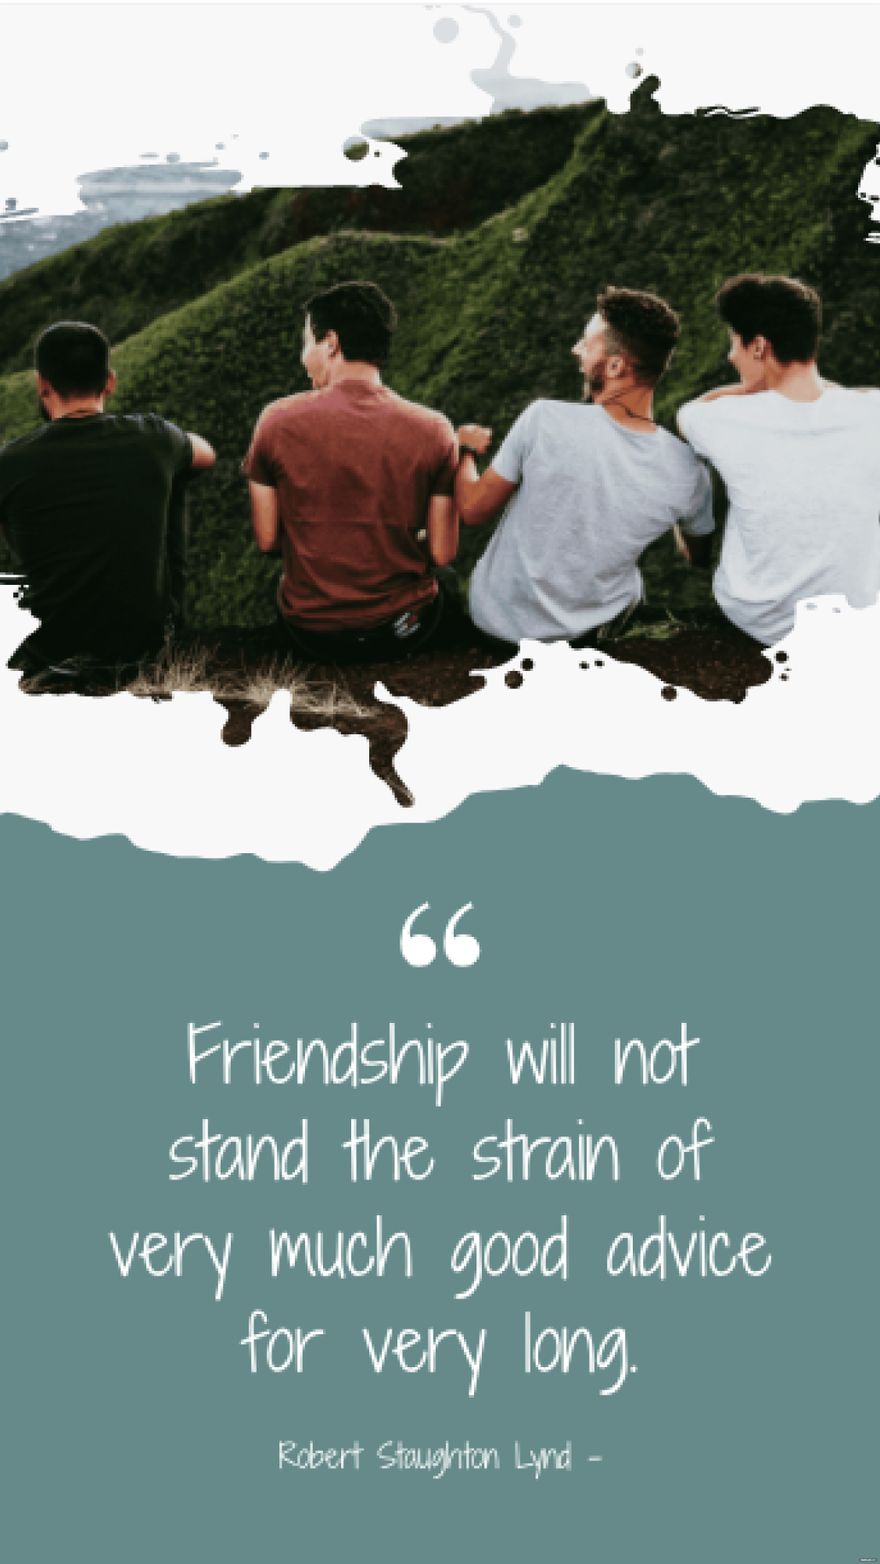 Robert Staughton Lynd - Friendship will not stand the strain of very much good advice for very long.